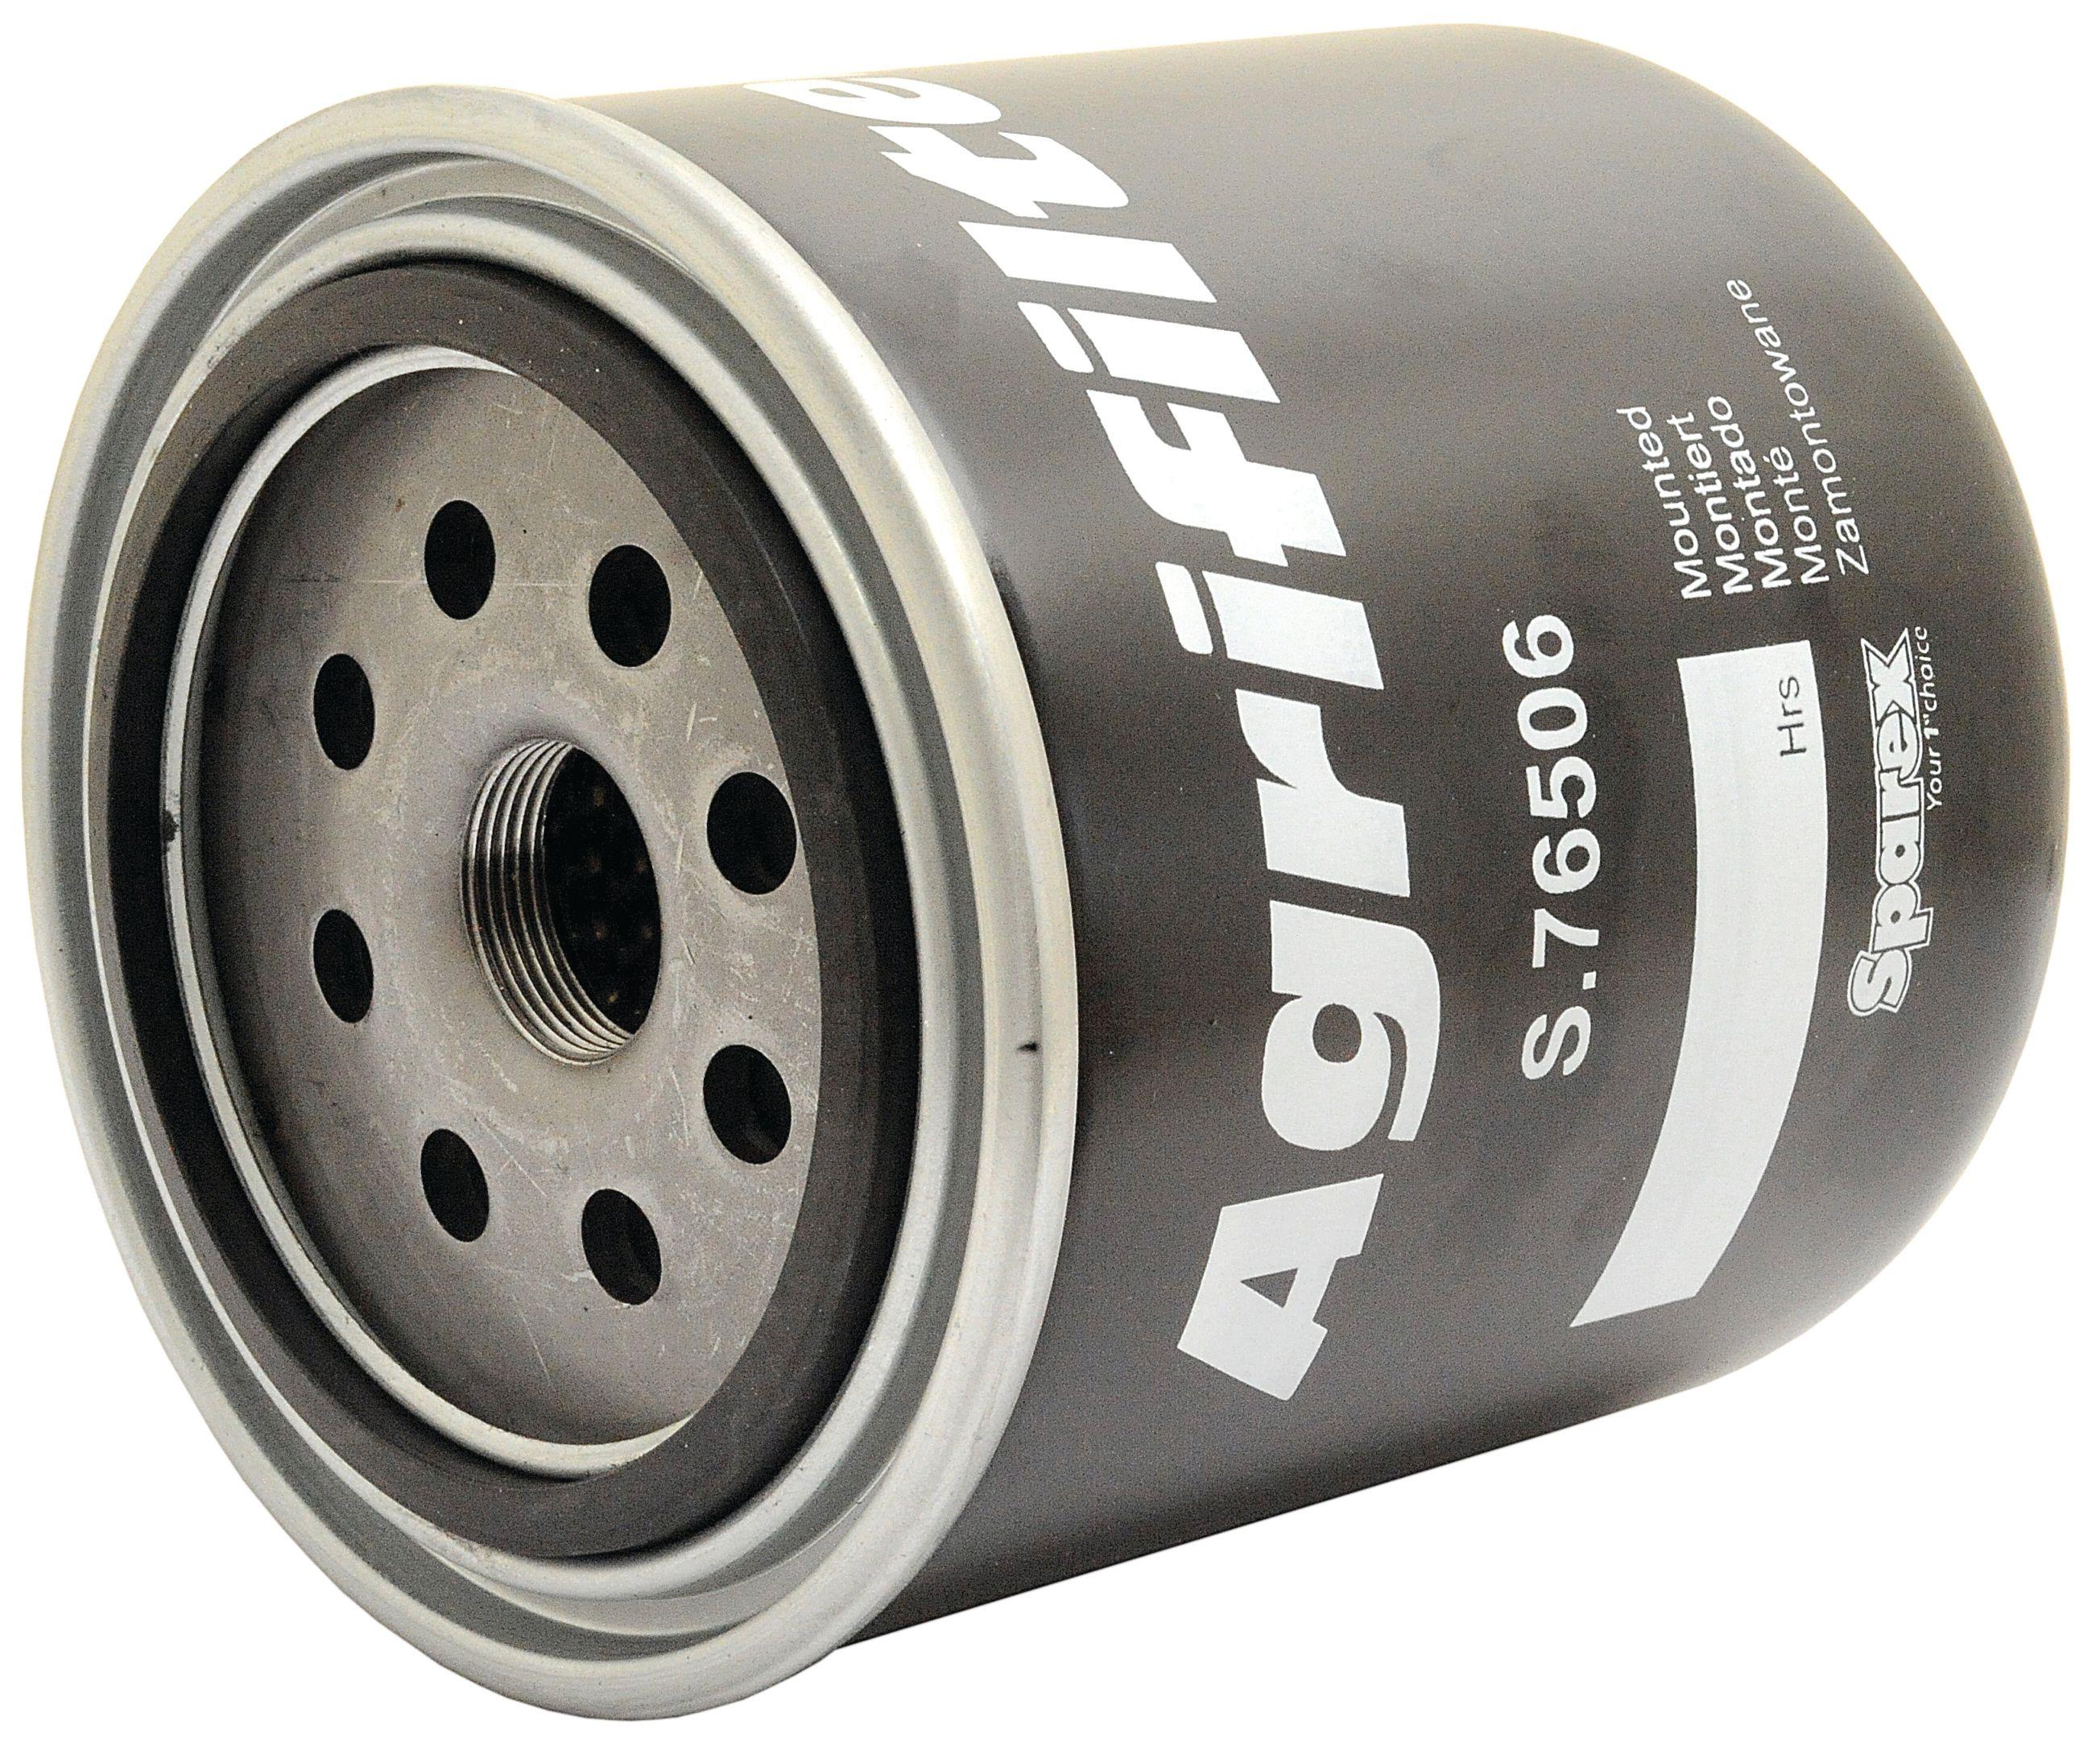 COUNTY OIL FILTER 76506